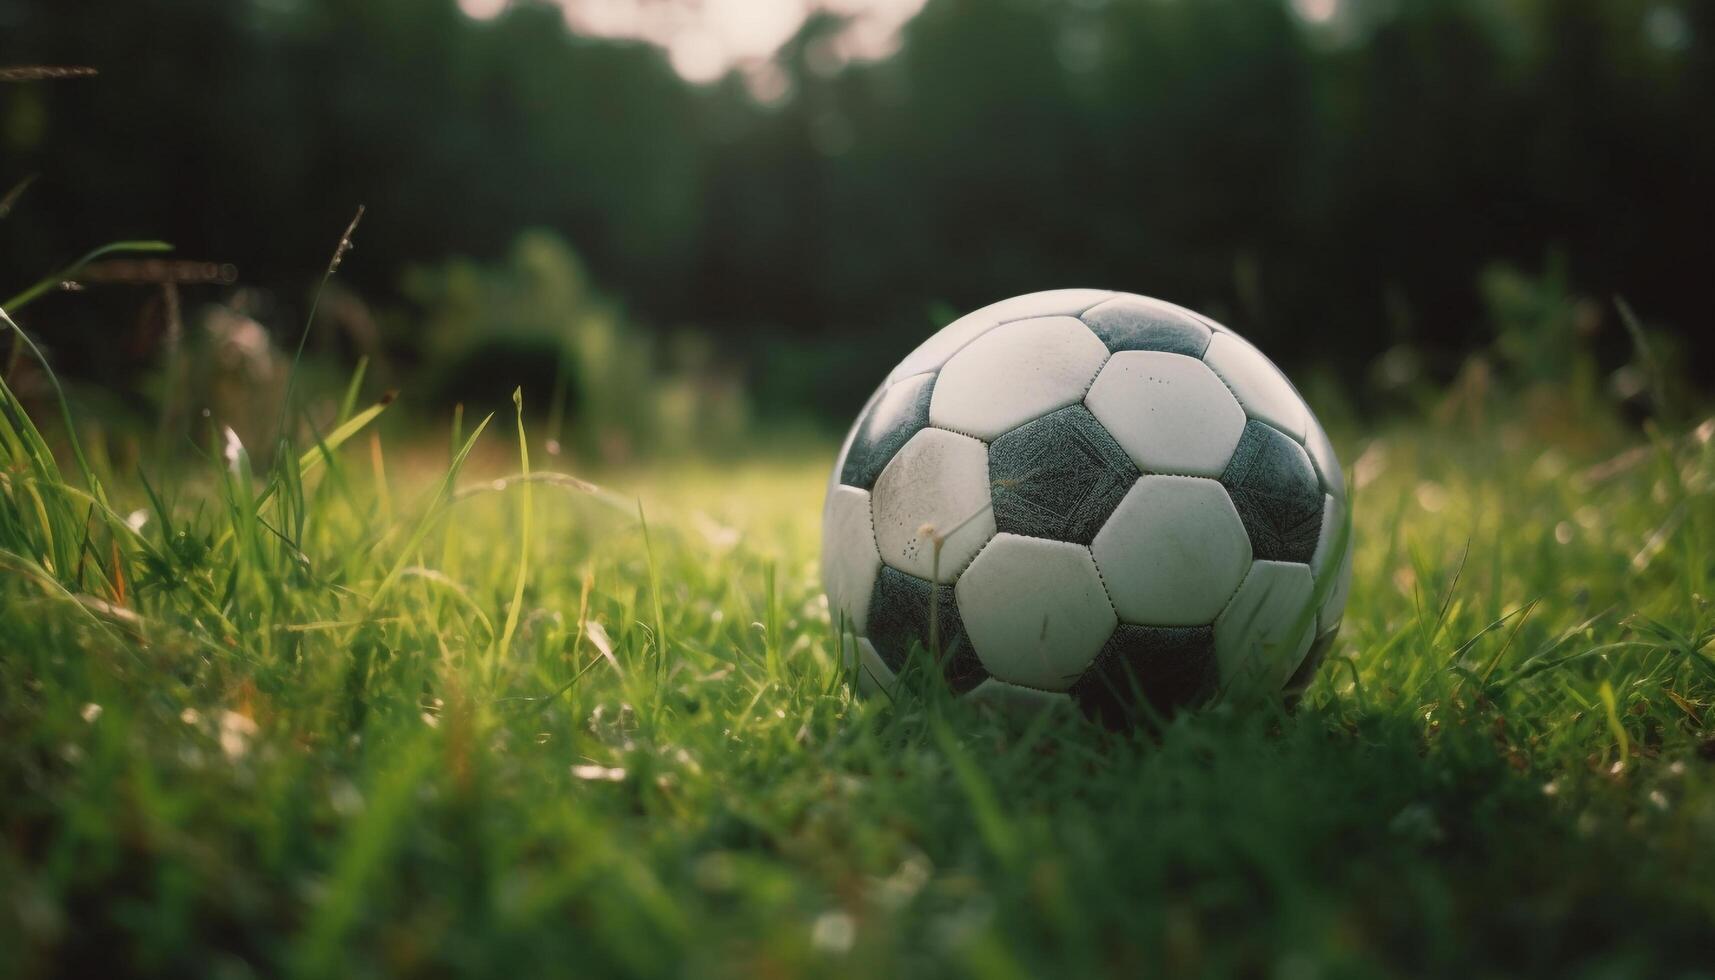 Green soccer ball rolls on grass field generated by AI photo